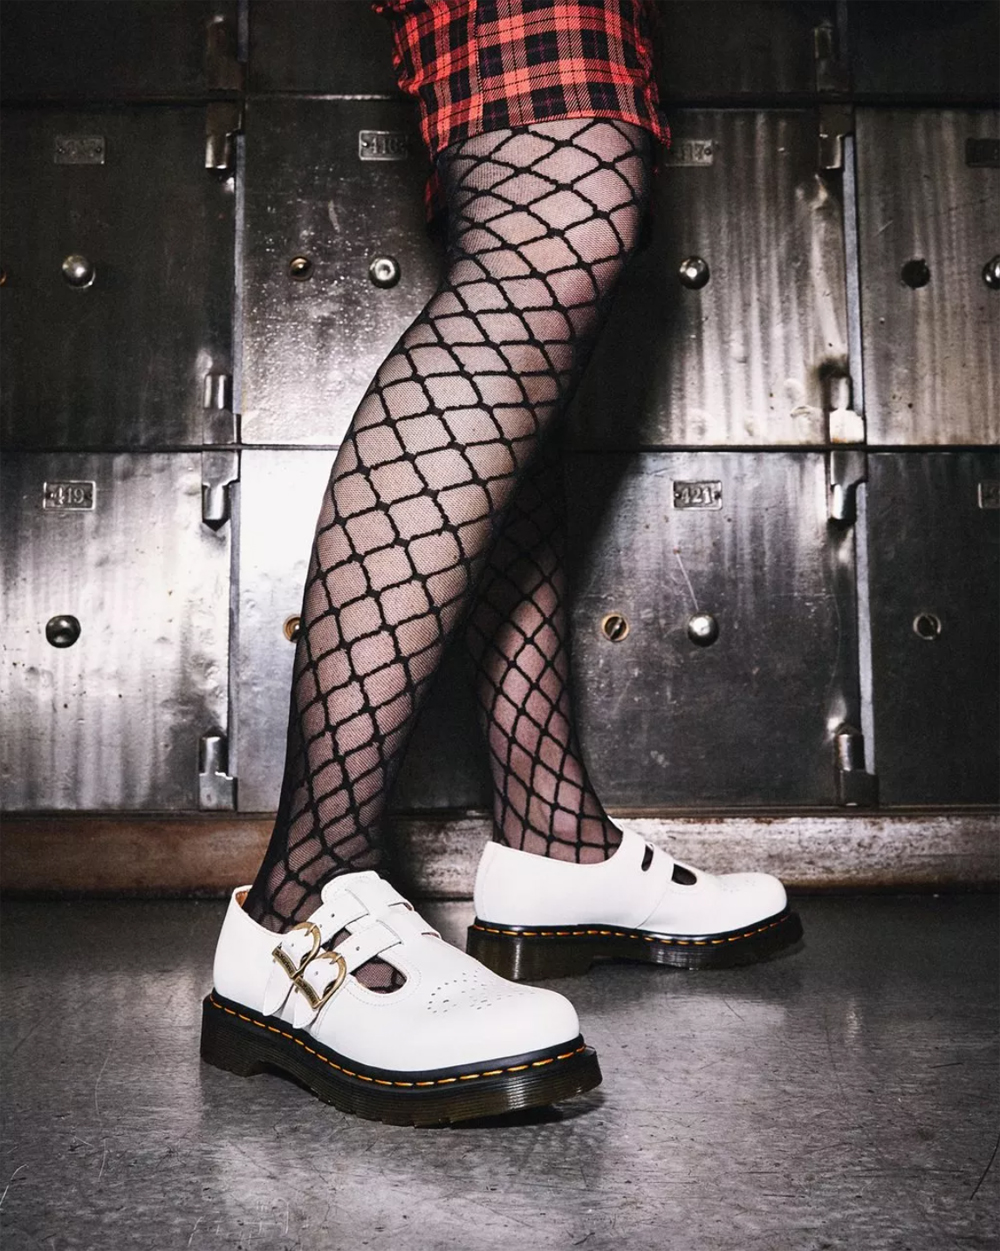 From shorts to jeans, you can style Dr. Martens with anything. Image courtesy of Dr. Martens.